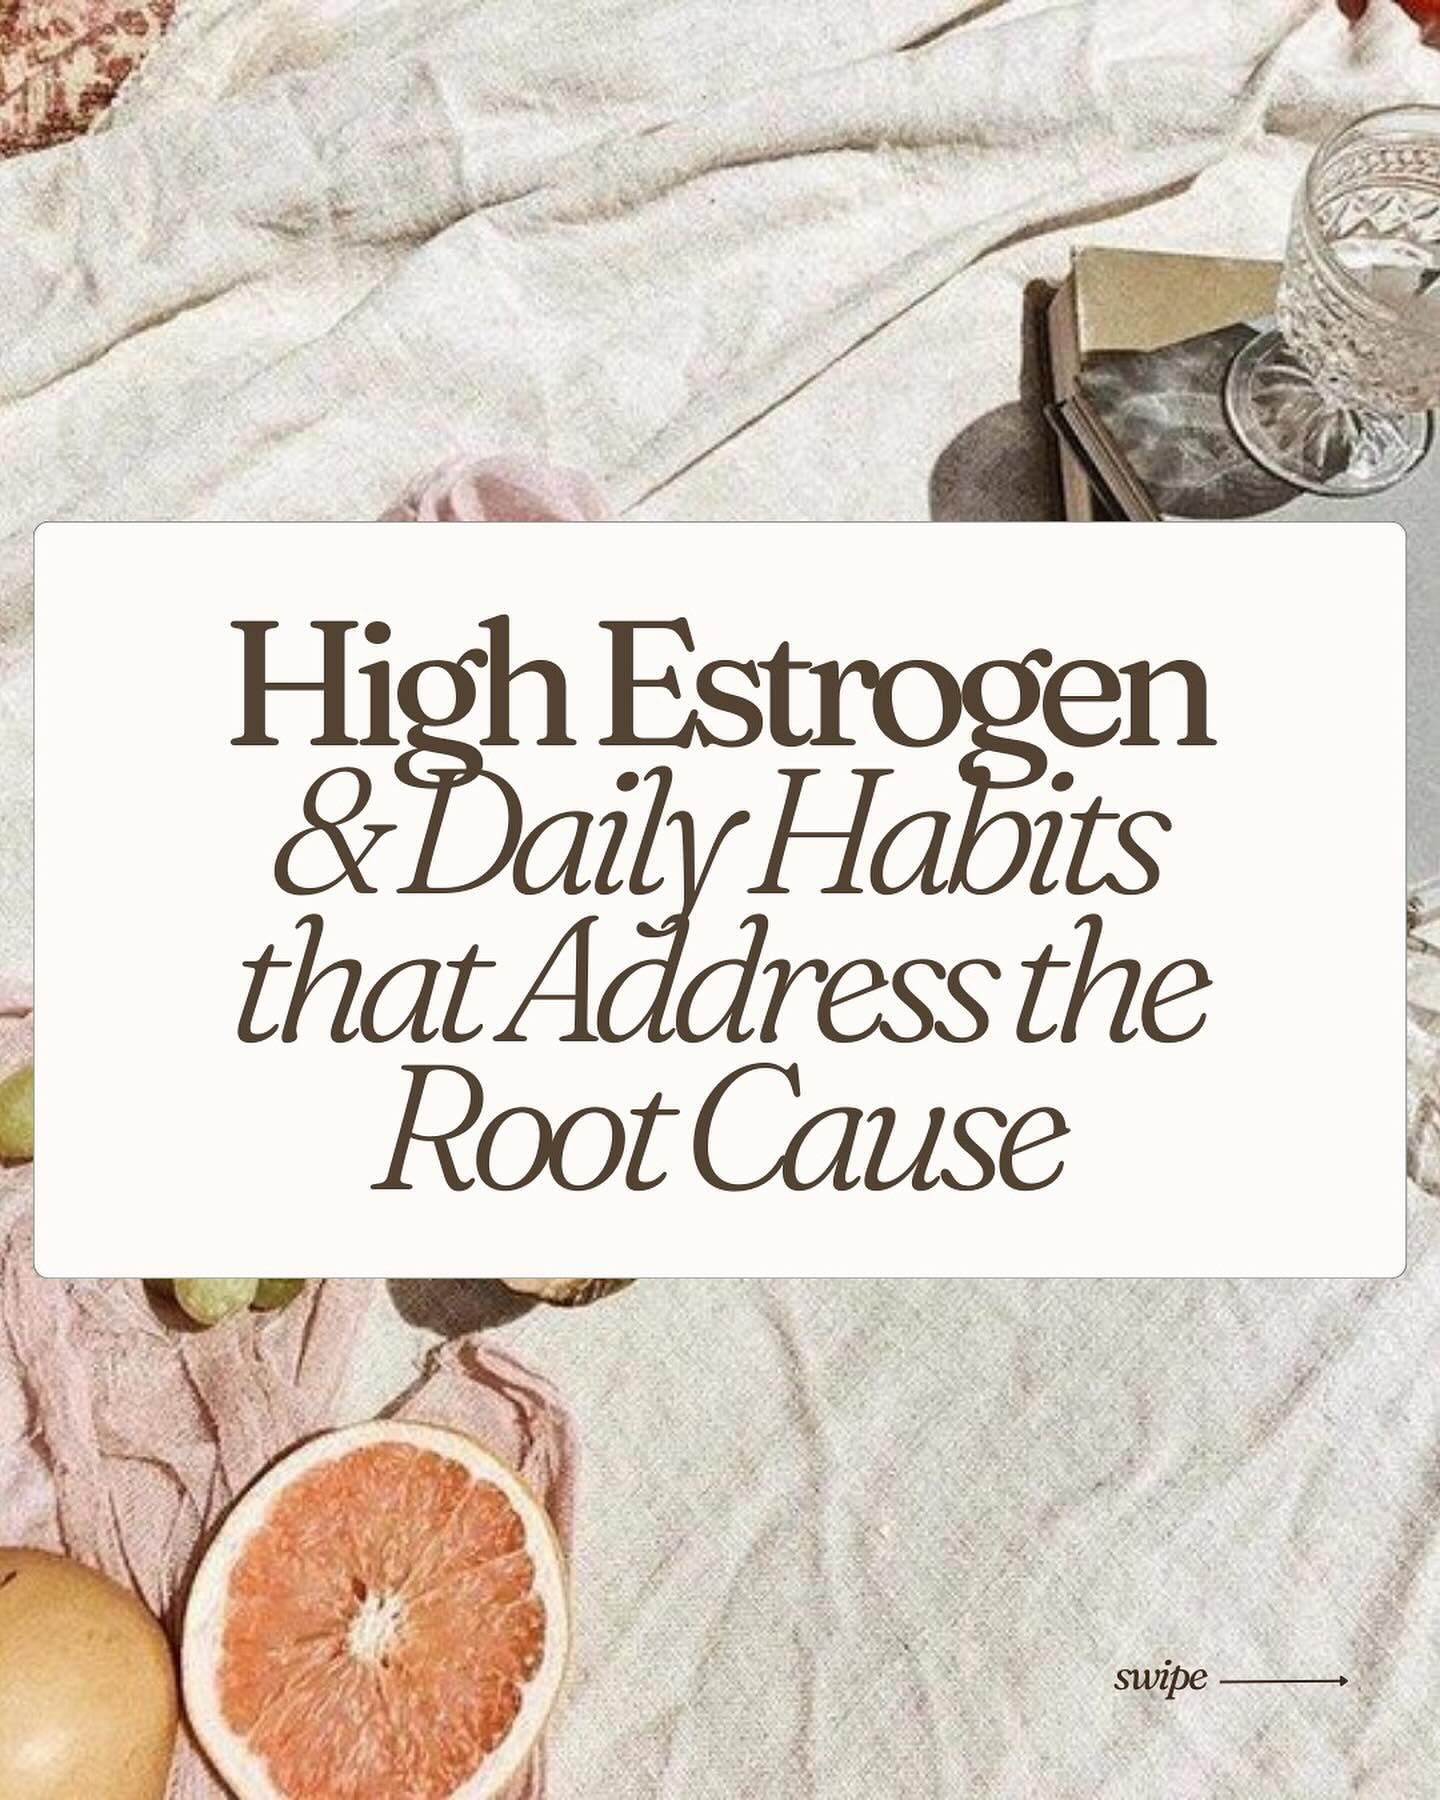 For every root cause of high estrogen, there&rsquo;s (at least) one daily habit you can incorporate into your routine that will help:

🧴 Reduce estrogen levels;
🥦 Support healthy estrogen metabolism; and 
🧘🏼&zwj;♀️ Boost progesterone production, 